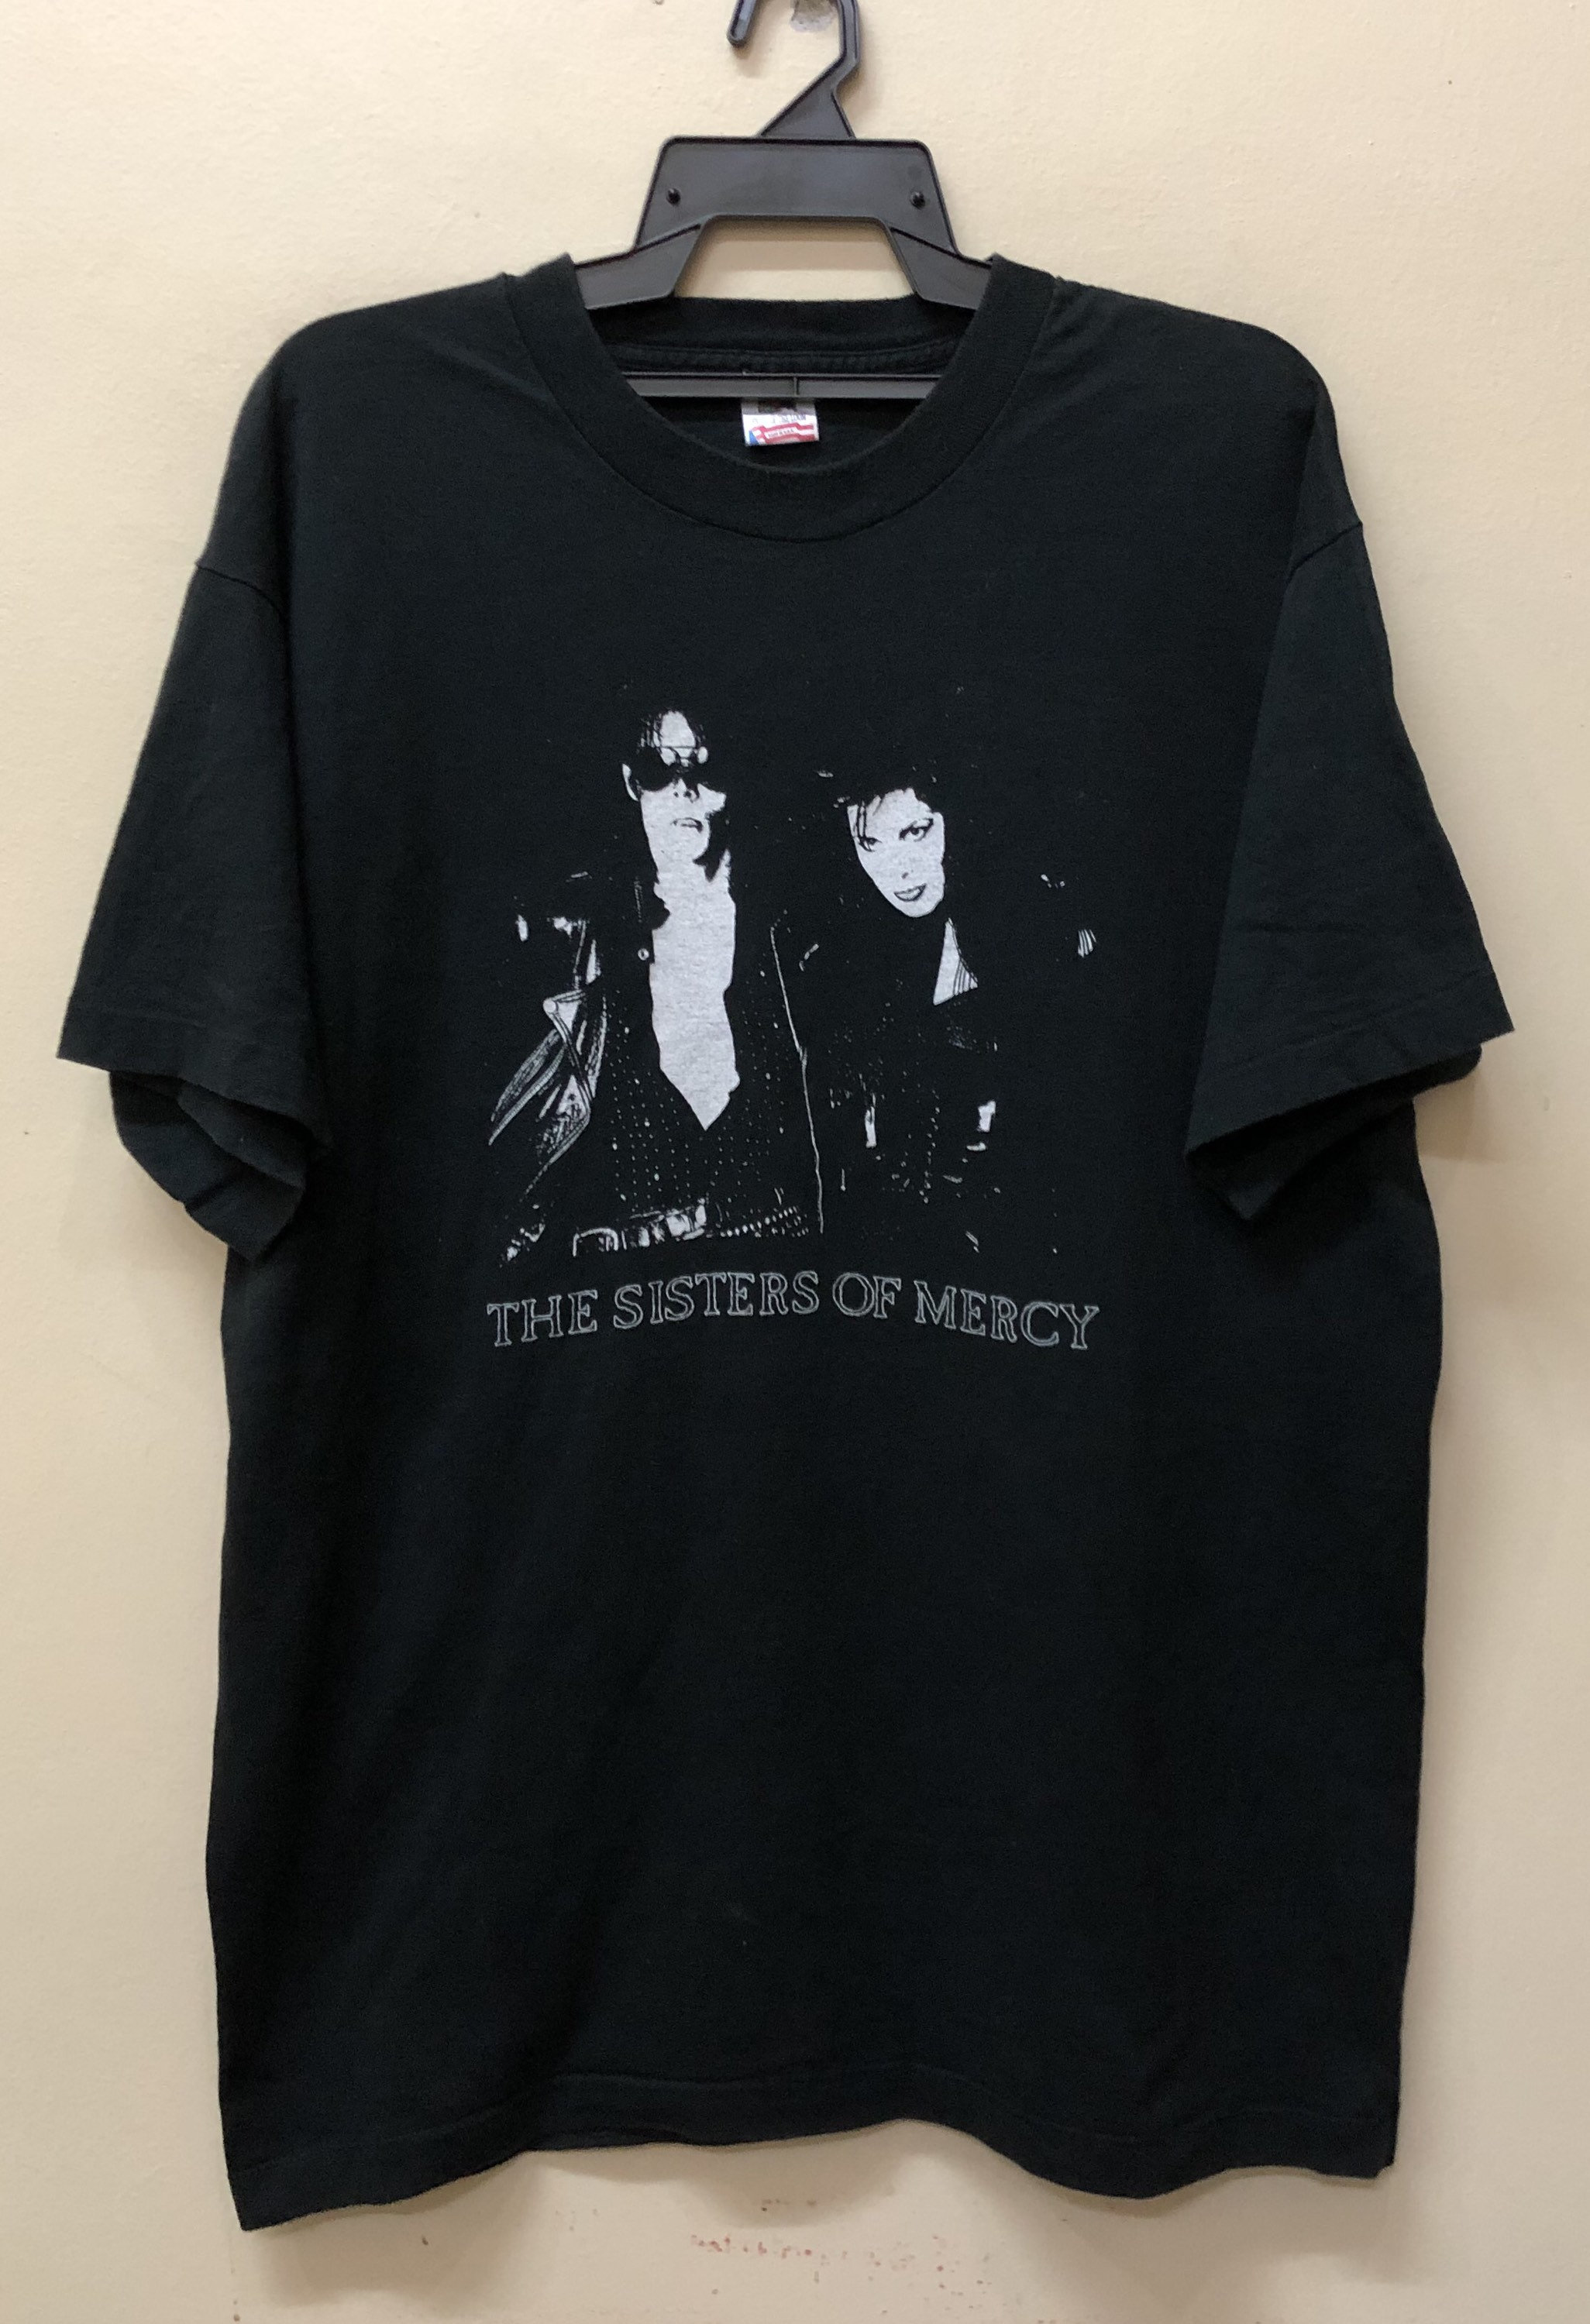 Vintage 90s The Sisters OF Mercy Bandtee T-Shirt | Etsy